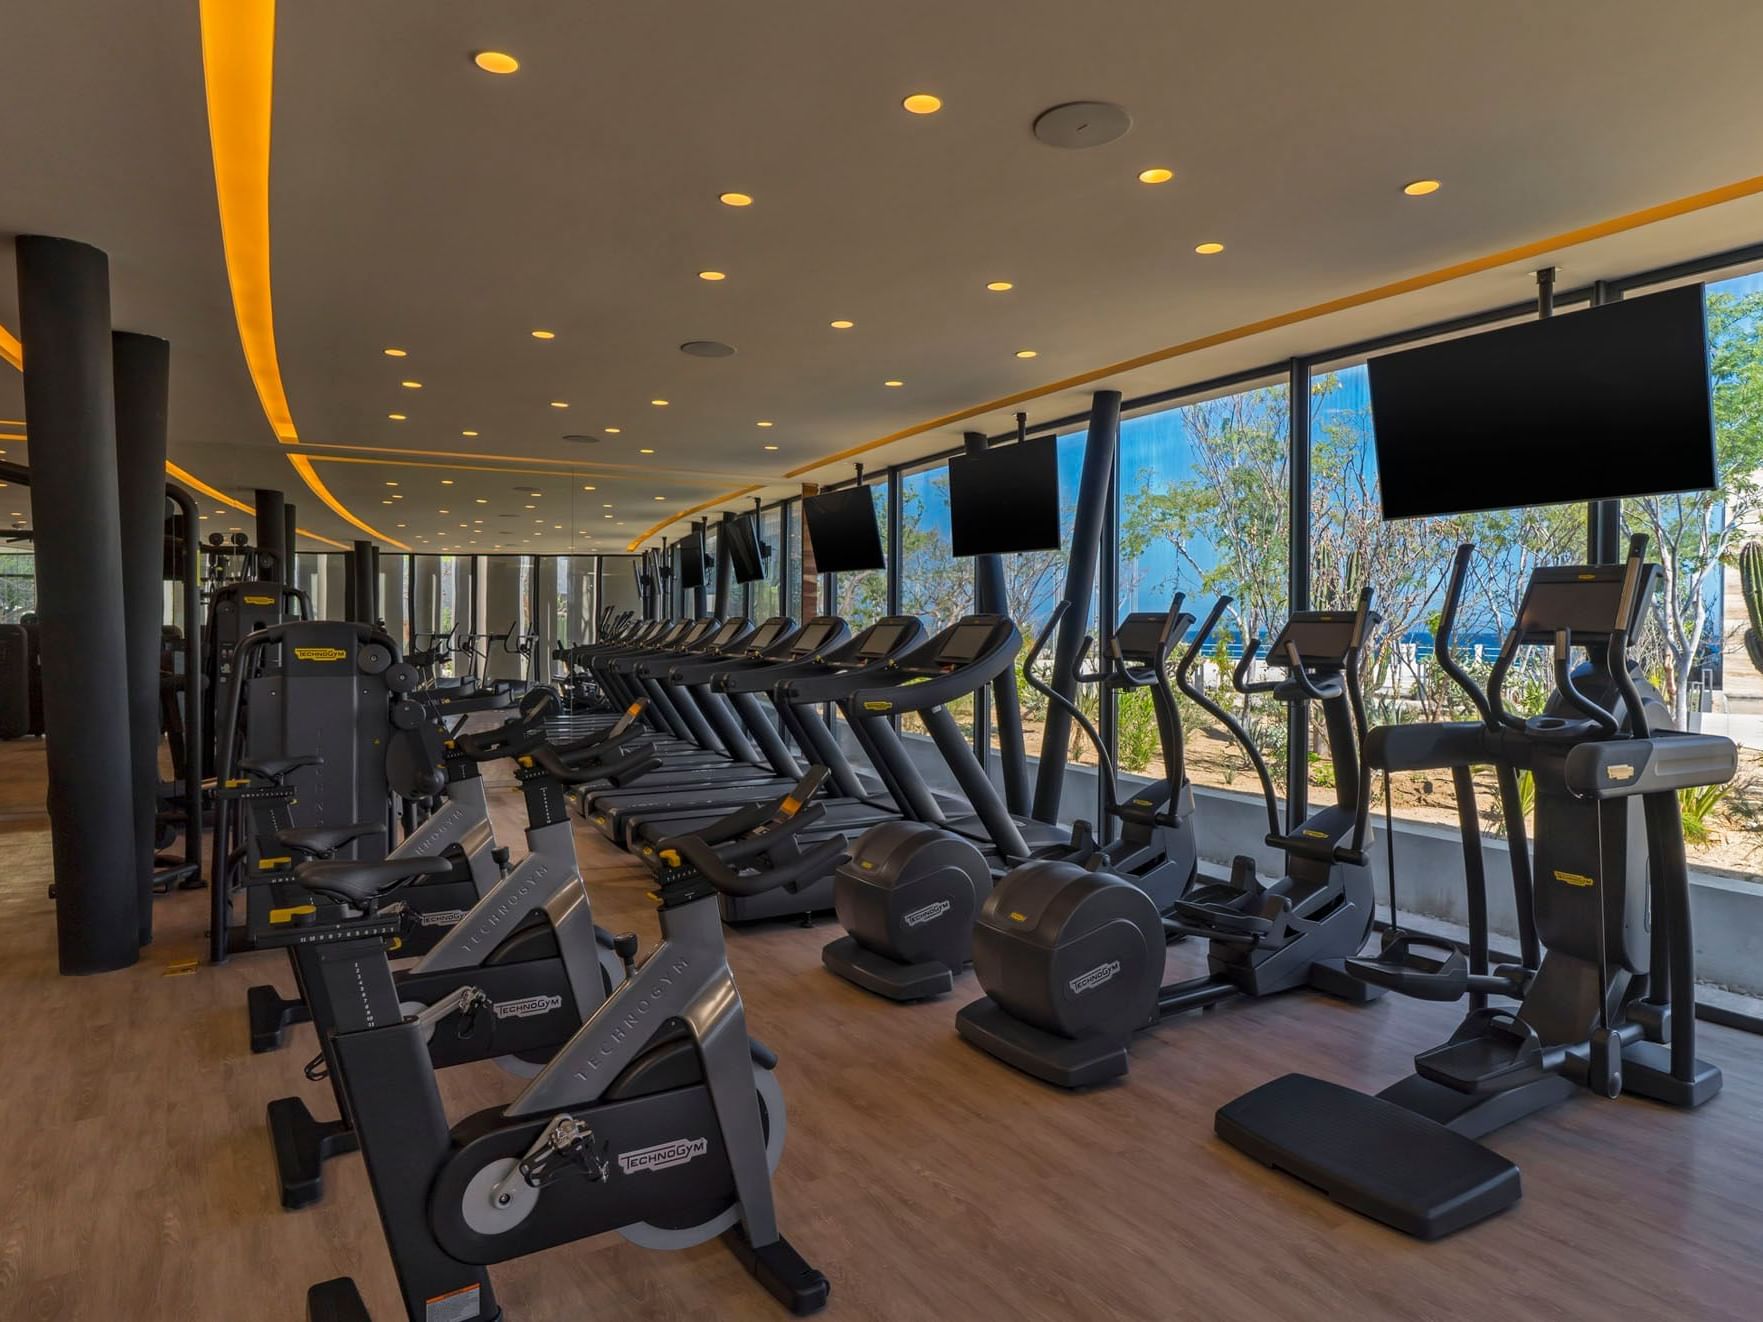 Treadmills, Exercise machines in Gymnasium at The Club at Solaz